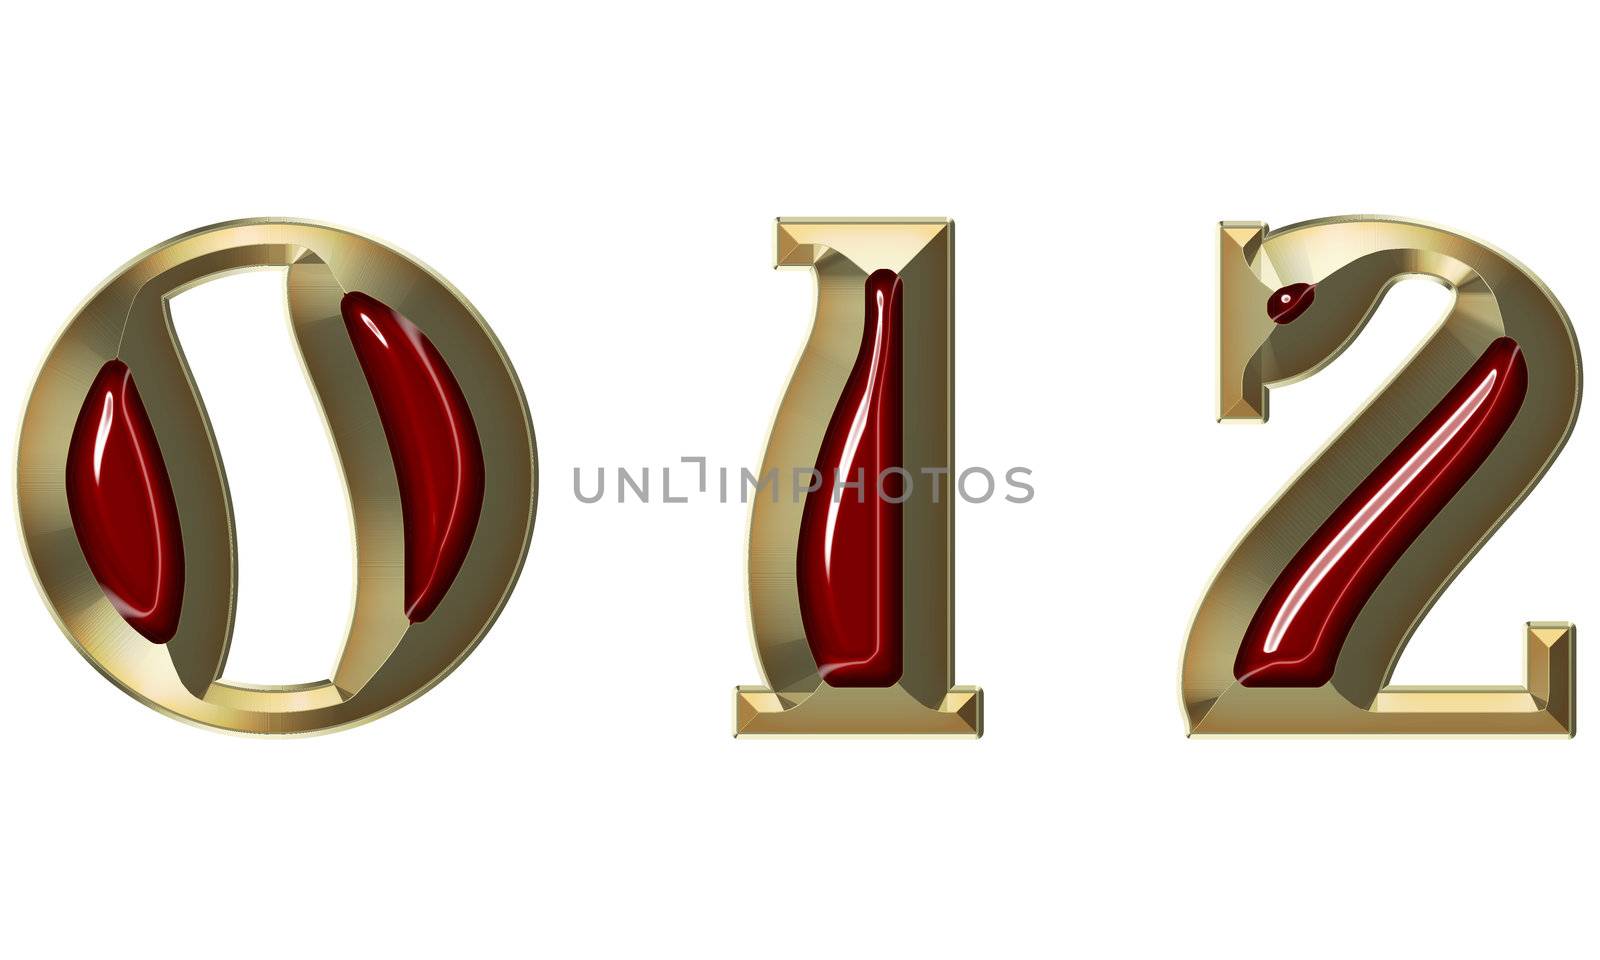 Font from brushed gold with ruby on white background